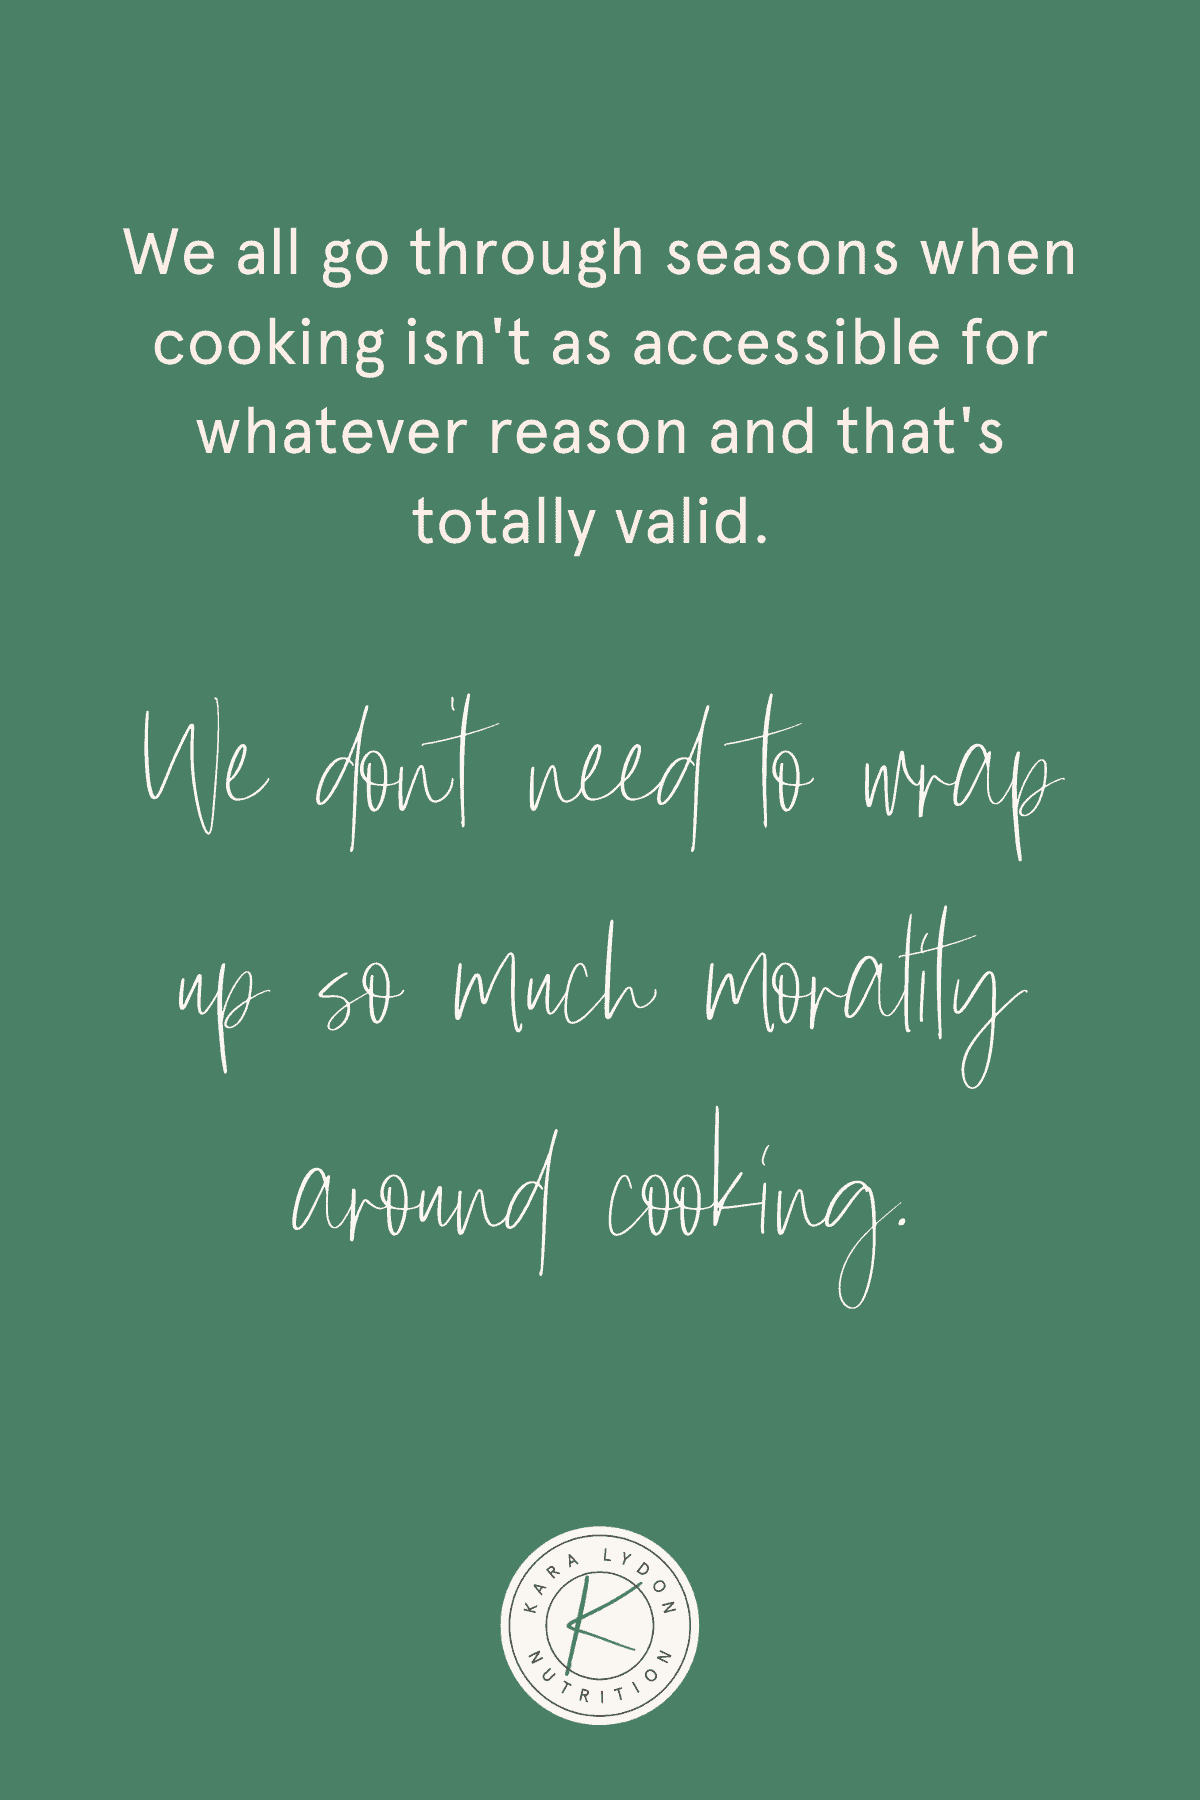 Graphic with quote: "We all go through seasons when cooking isn't as accessible for whatever reason and that's totally valid. We don't need to wrap up so much morality around cooking."